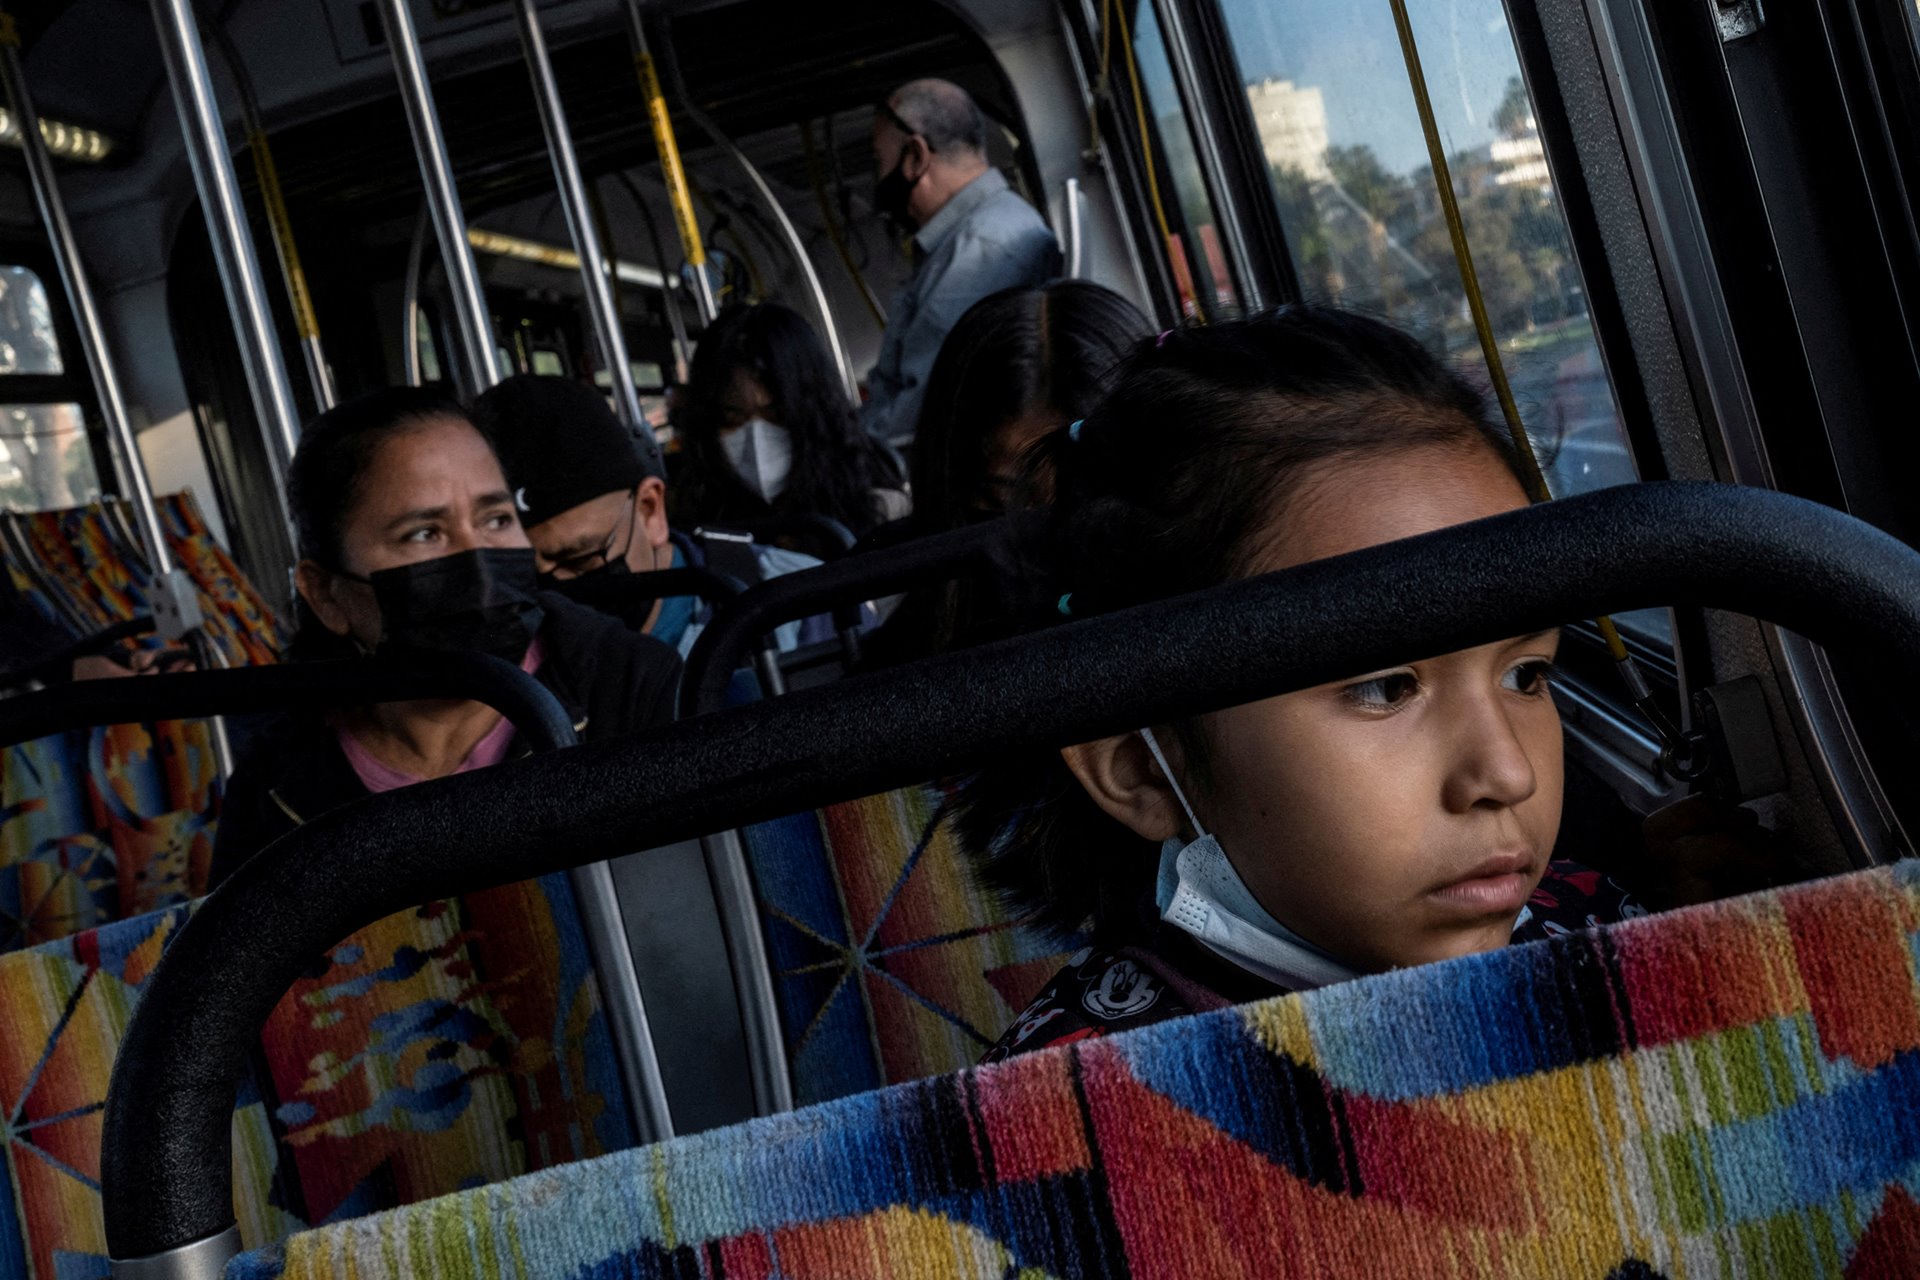 Maria Hernandez travels by bus with her daughters Nicole (foreground) and Michelle on the way to Nicole&rsquo;s school, in Los Angeles, California, United States.